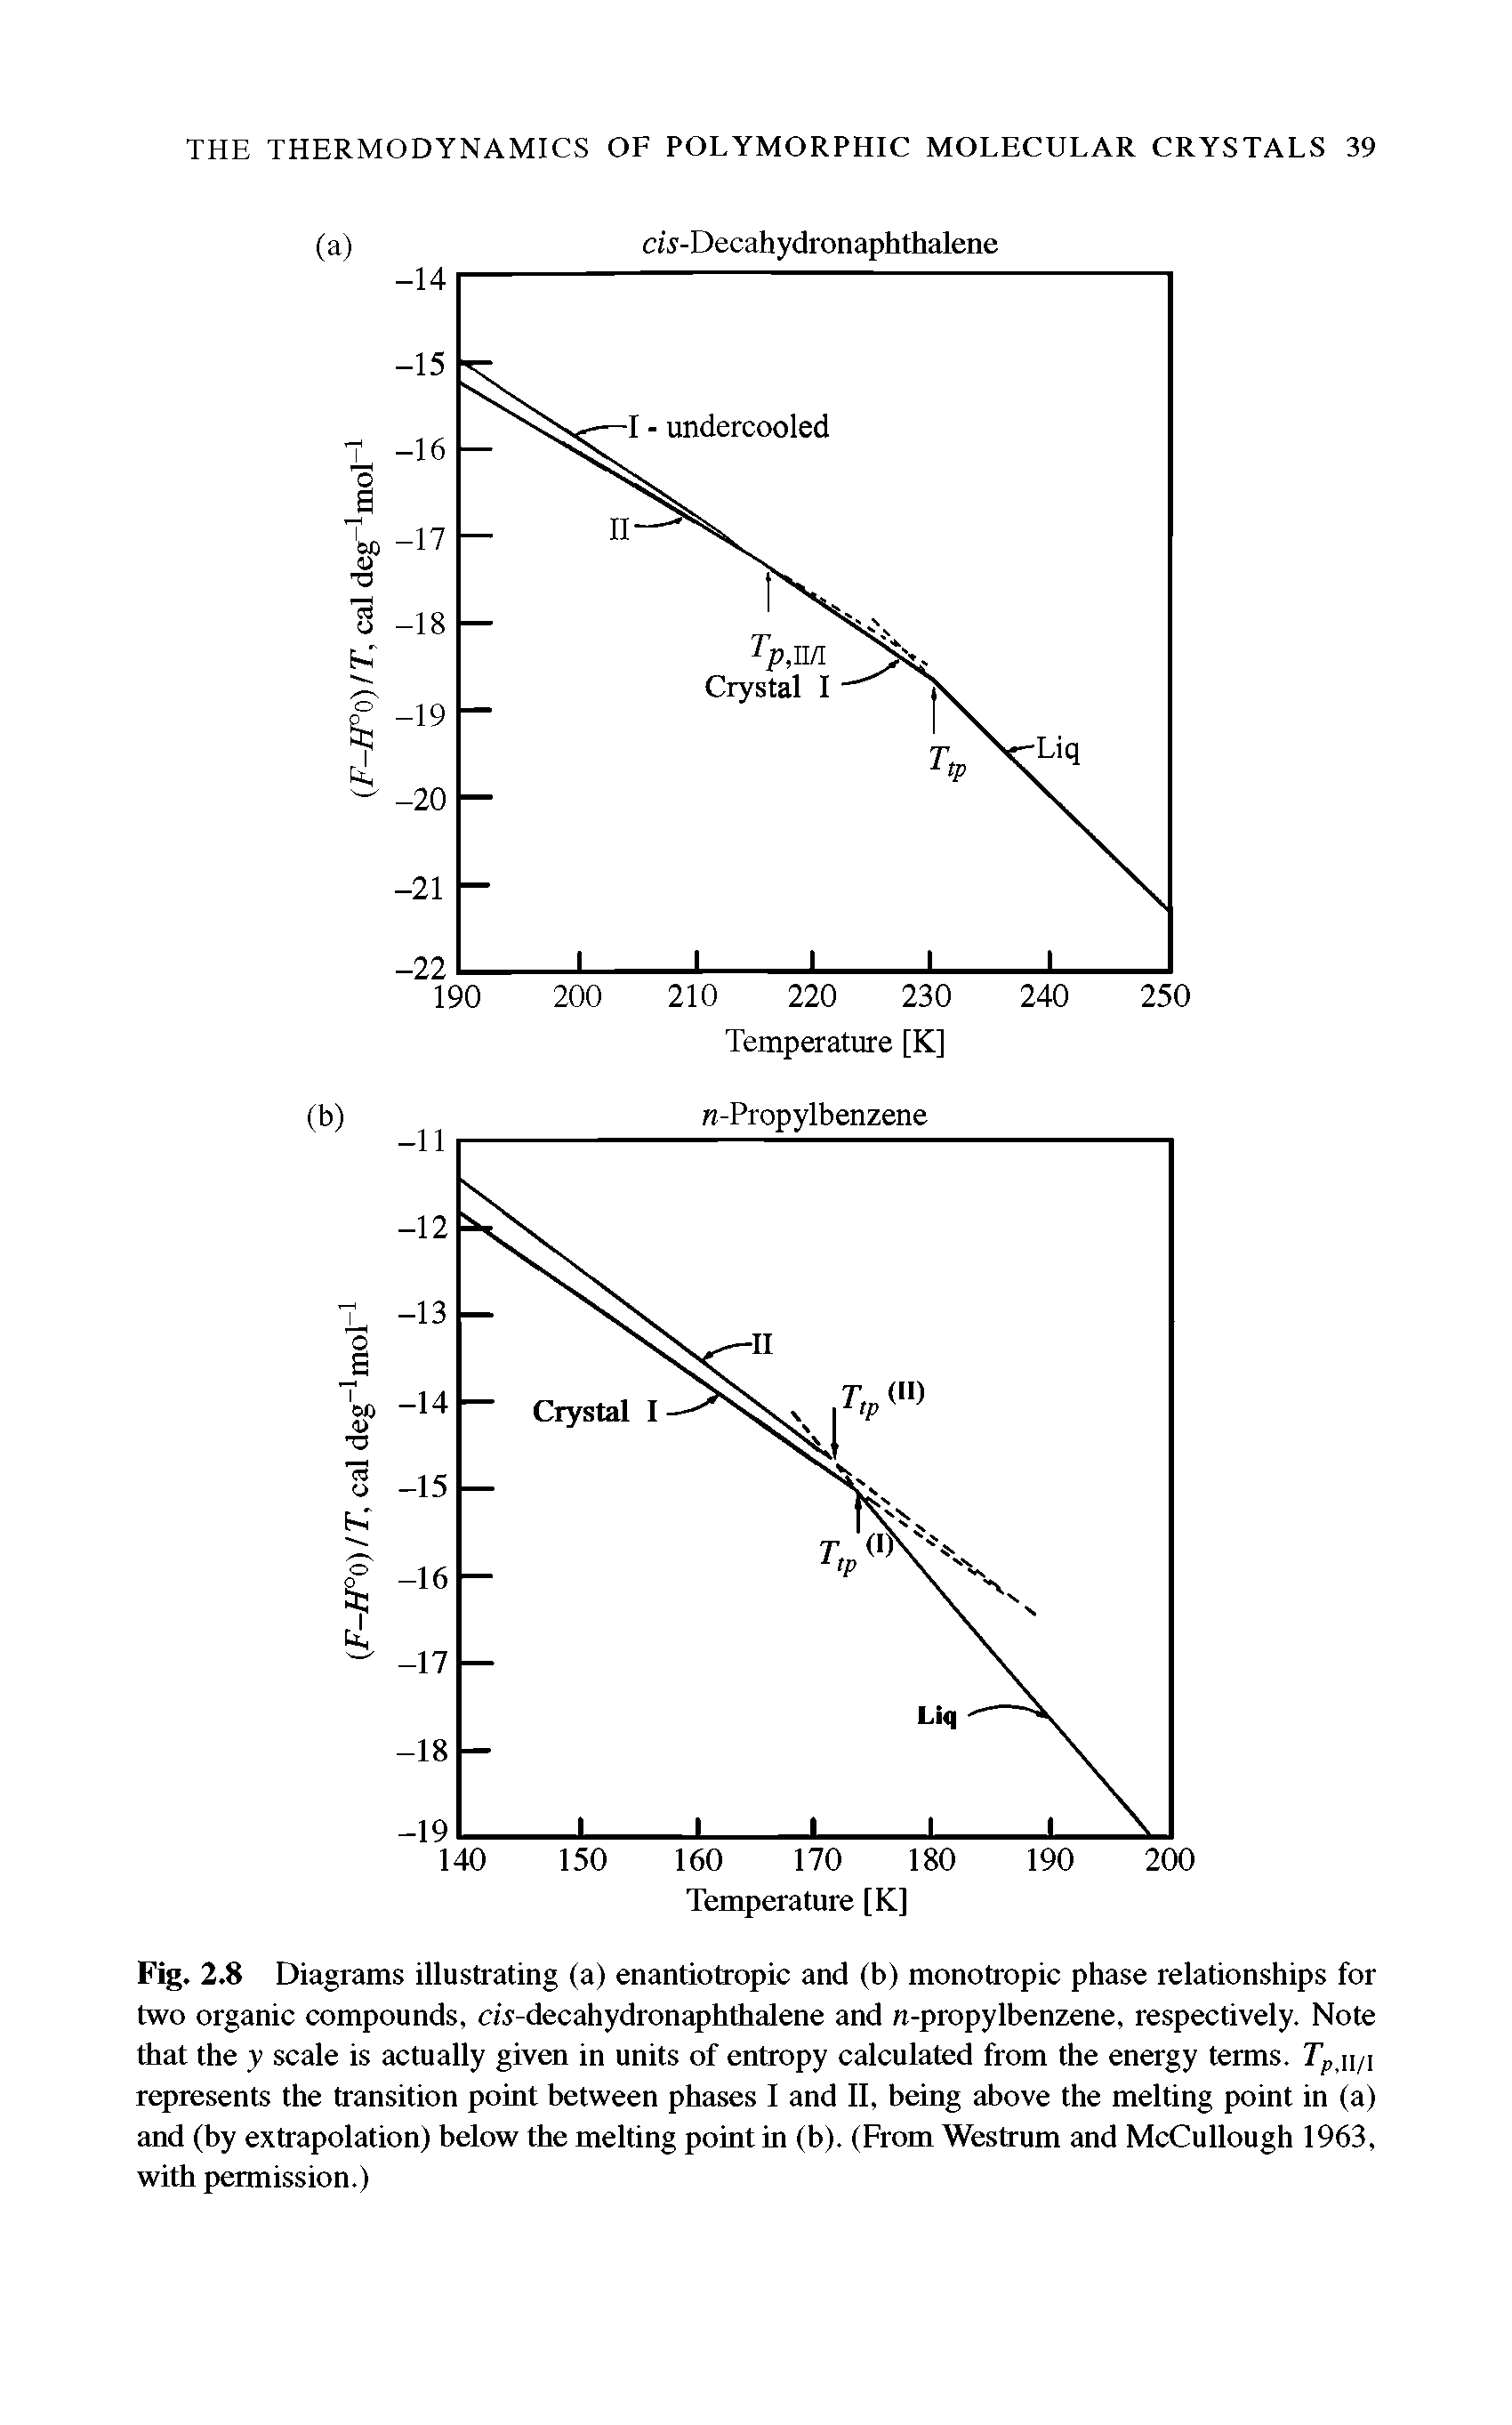 Fig. 2.8 Diagrams illustrating (a) enantiotropic and (b) monotropic phase relationships for two organic compounds, cw-decahydronaphthalene and n-propylbenzene, respectively. Note that the y scale is actually given in units of entropy calculated from the energy terms. 7), n/i represents the transition point between phases I and II, being above the melting point in (a) and (by extrapolation) below the melting point in (b). (From Westrum and McCullough 1963, with permission.)...